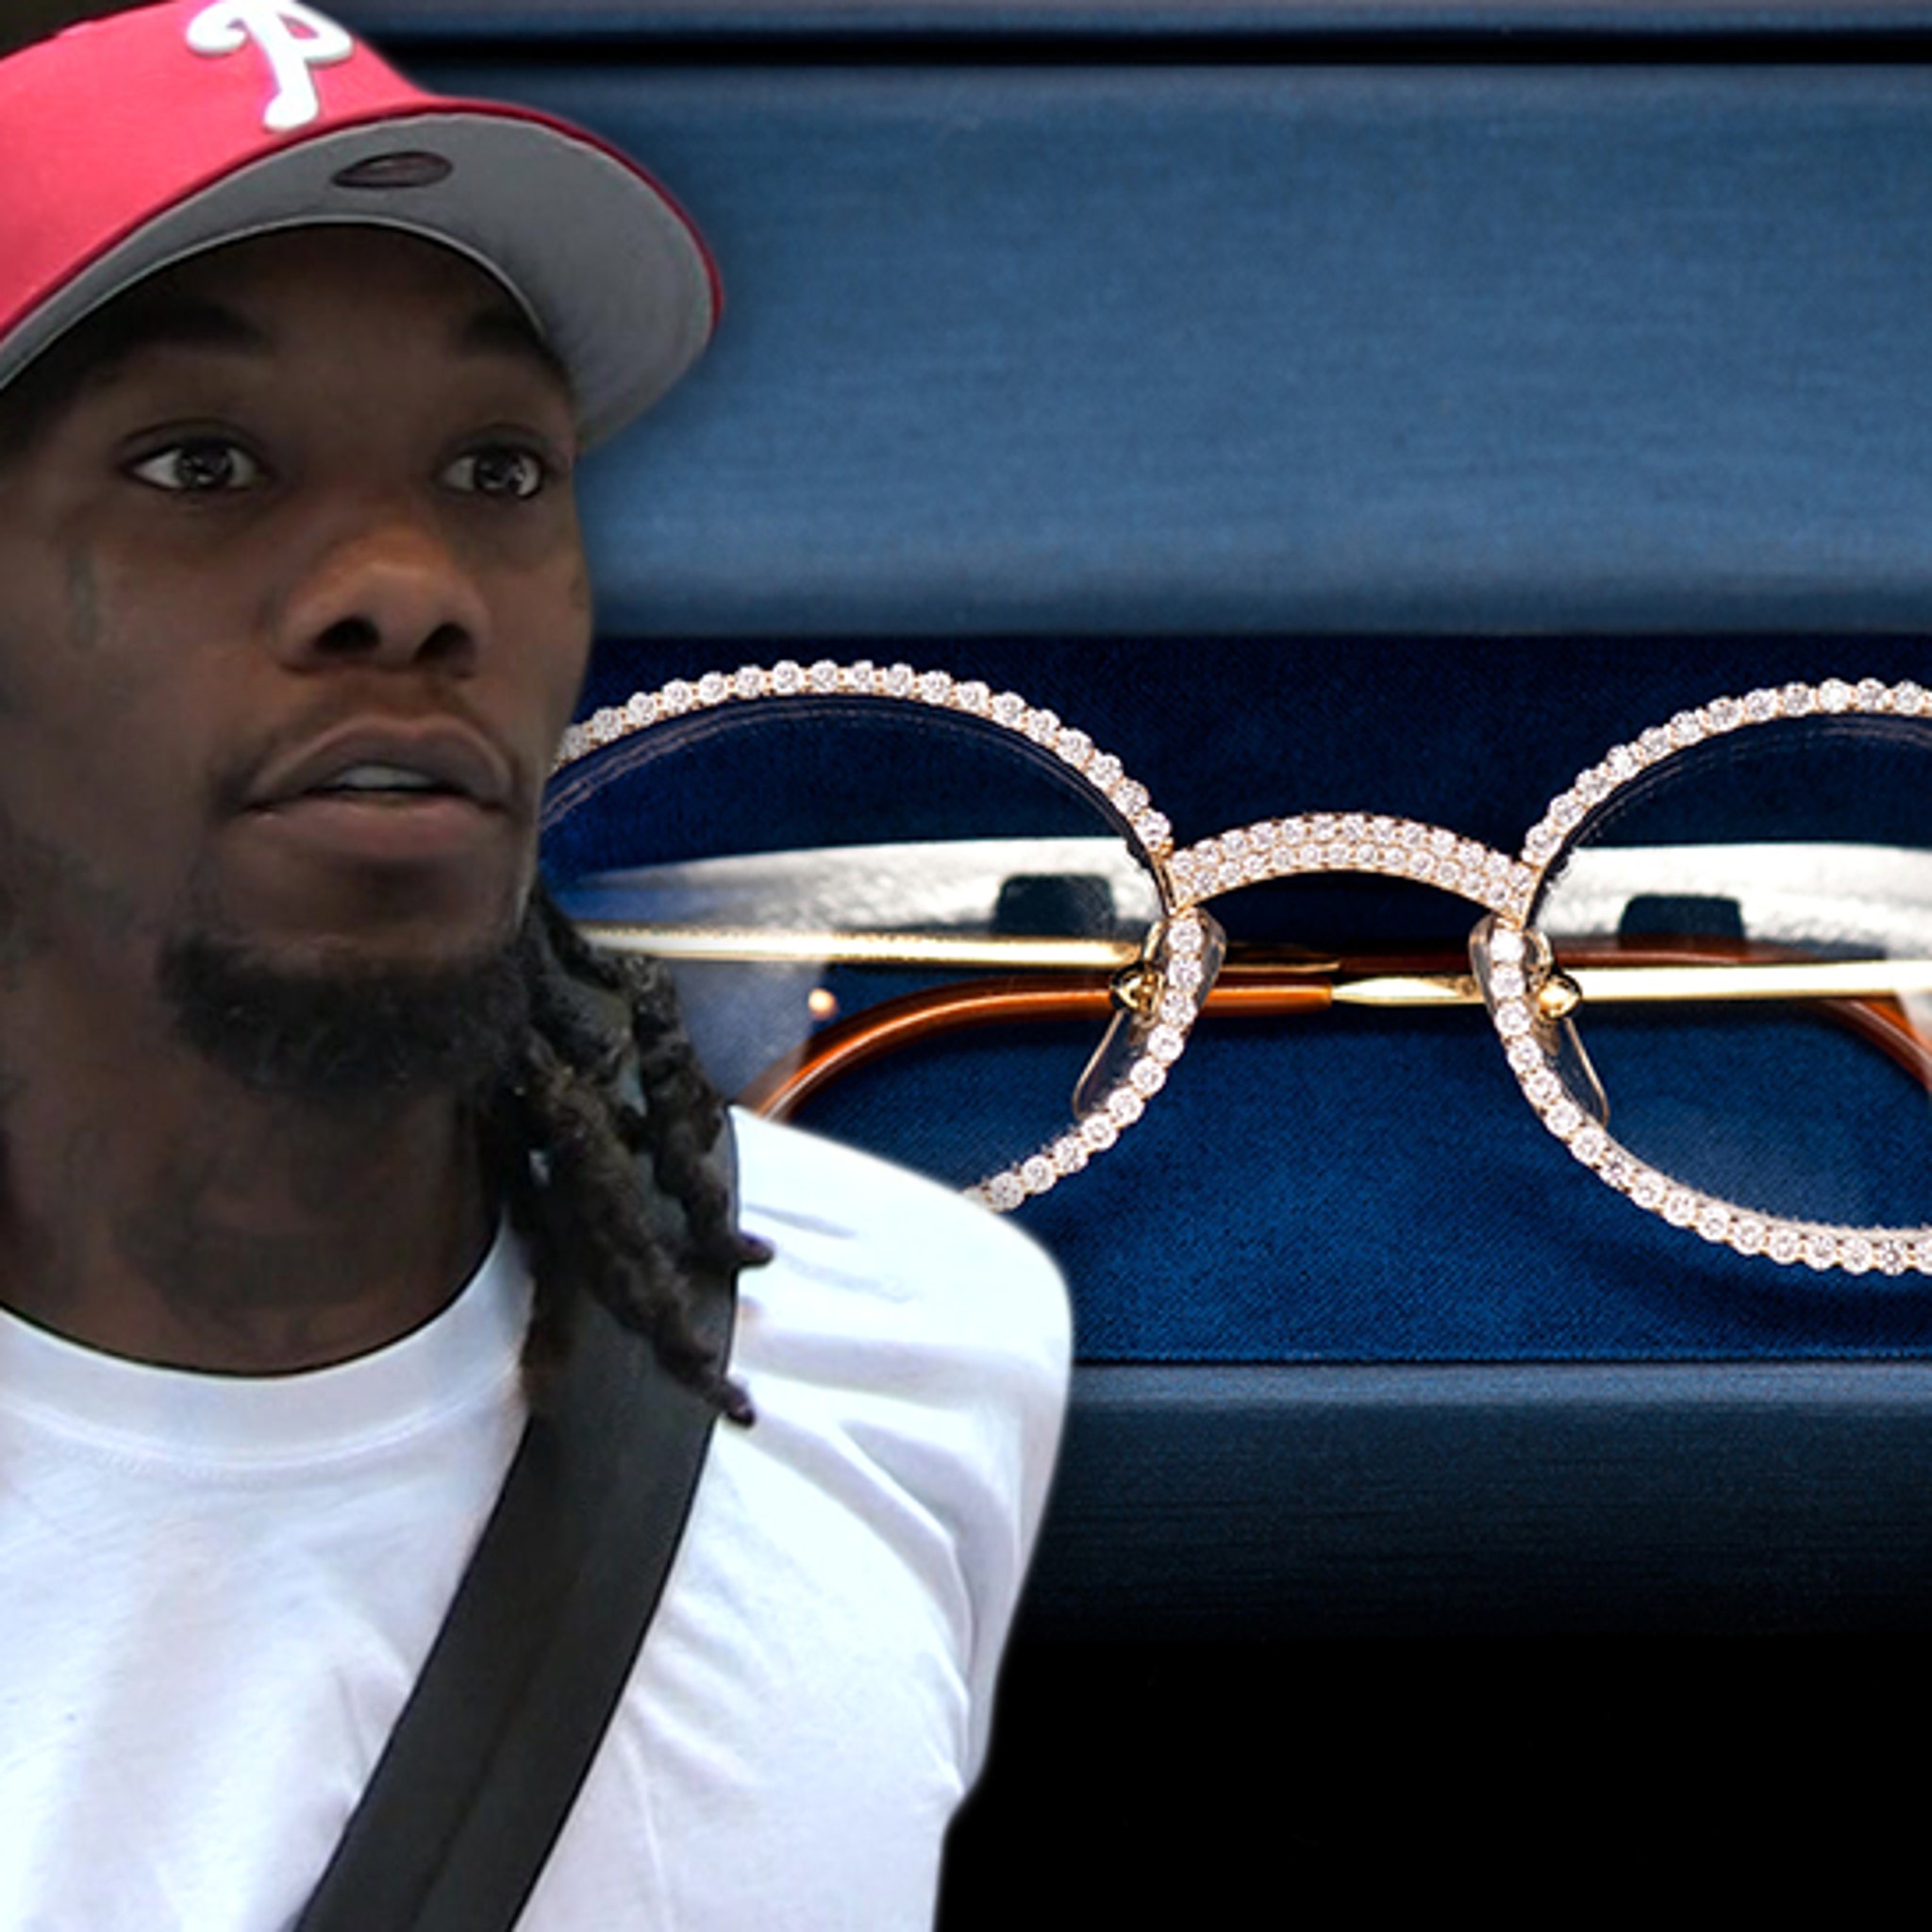 Custom Diamond Chains and Cartier Glasses